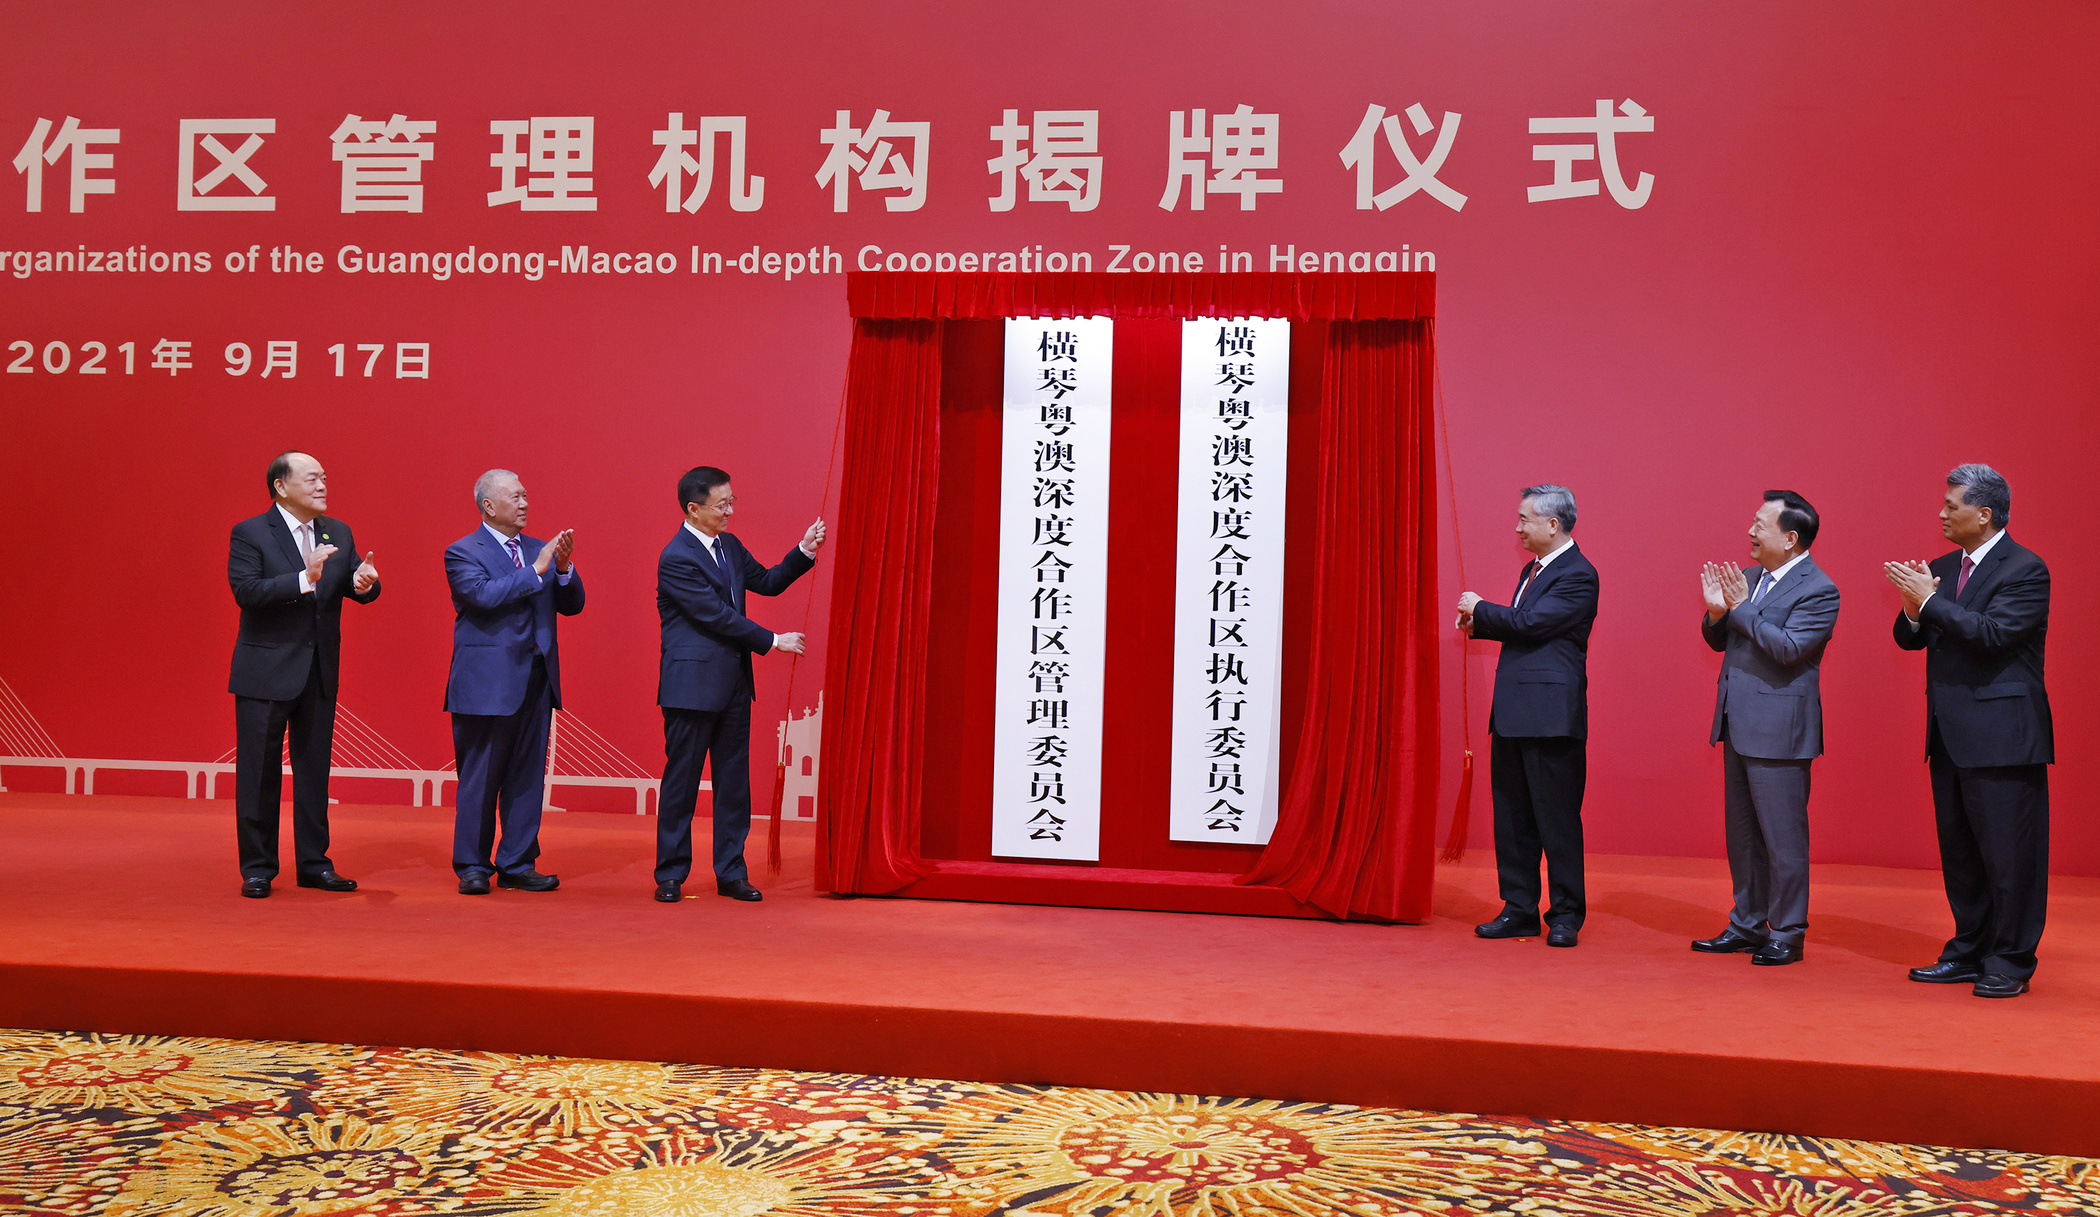 Macao Chief Executive Ho Iat Seng attended the inaugural ceremony of the Guangdong–Macao Intensive Cooperation Zone